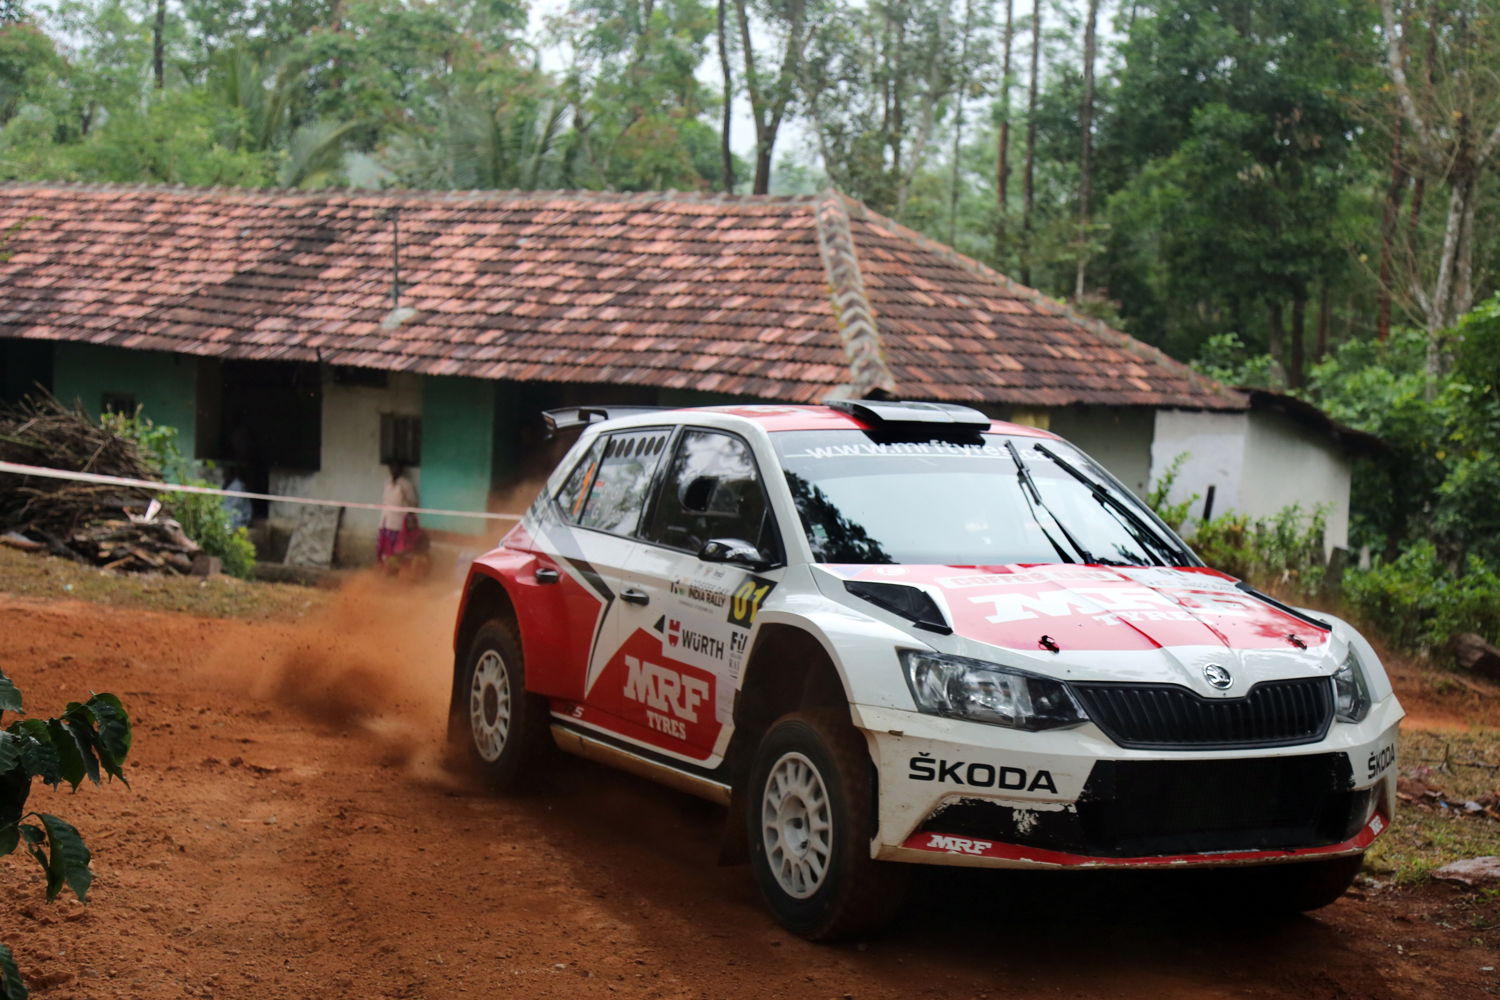 Gaurav Gill won his home rally in India to end the APRC season with a flawless record of six wins from six races. Co-Driver Glenn Macneall also wrapped up the Co-Driver title.